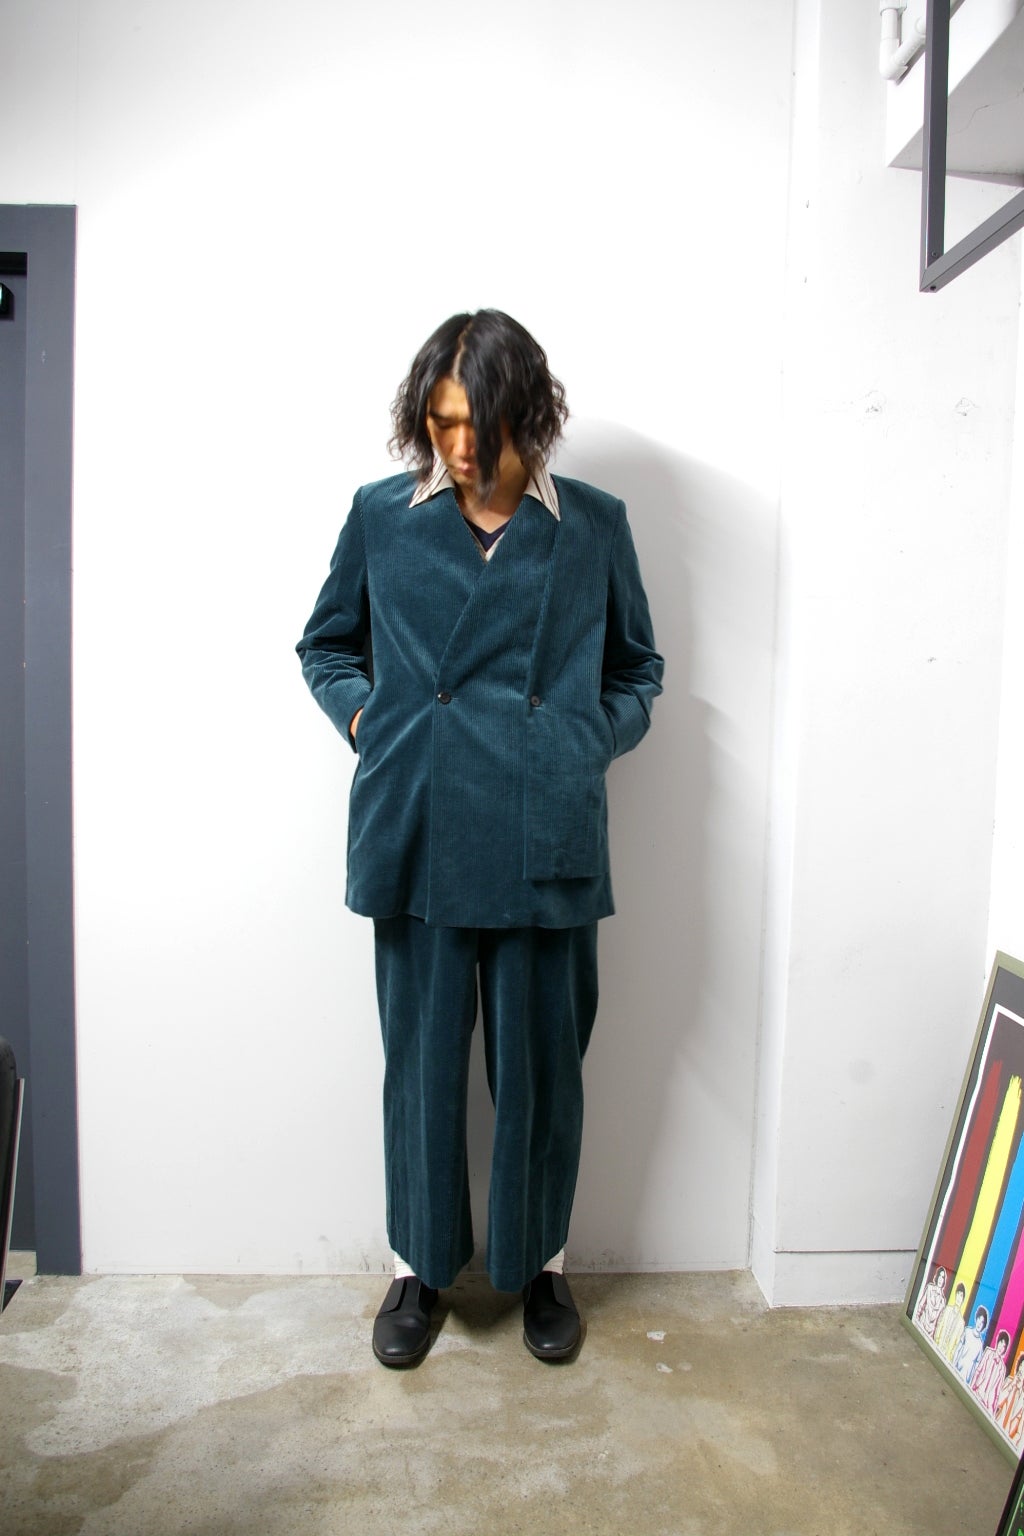 ETHOSENS(エトセンス)/Colorless layer jacket/Green 通販 取り扱い 